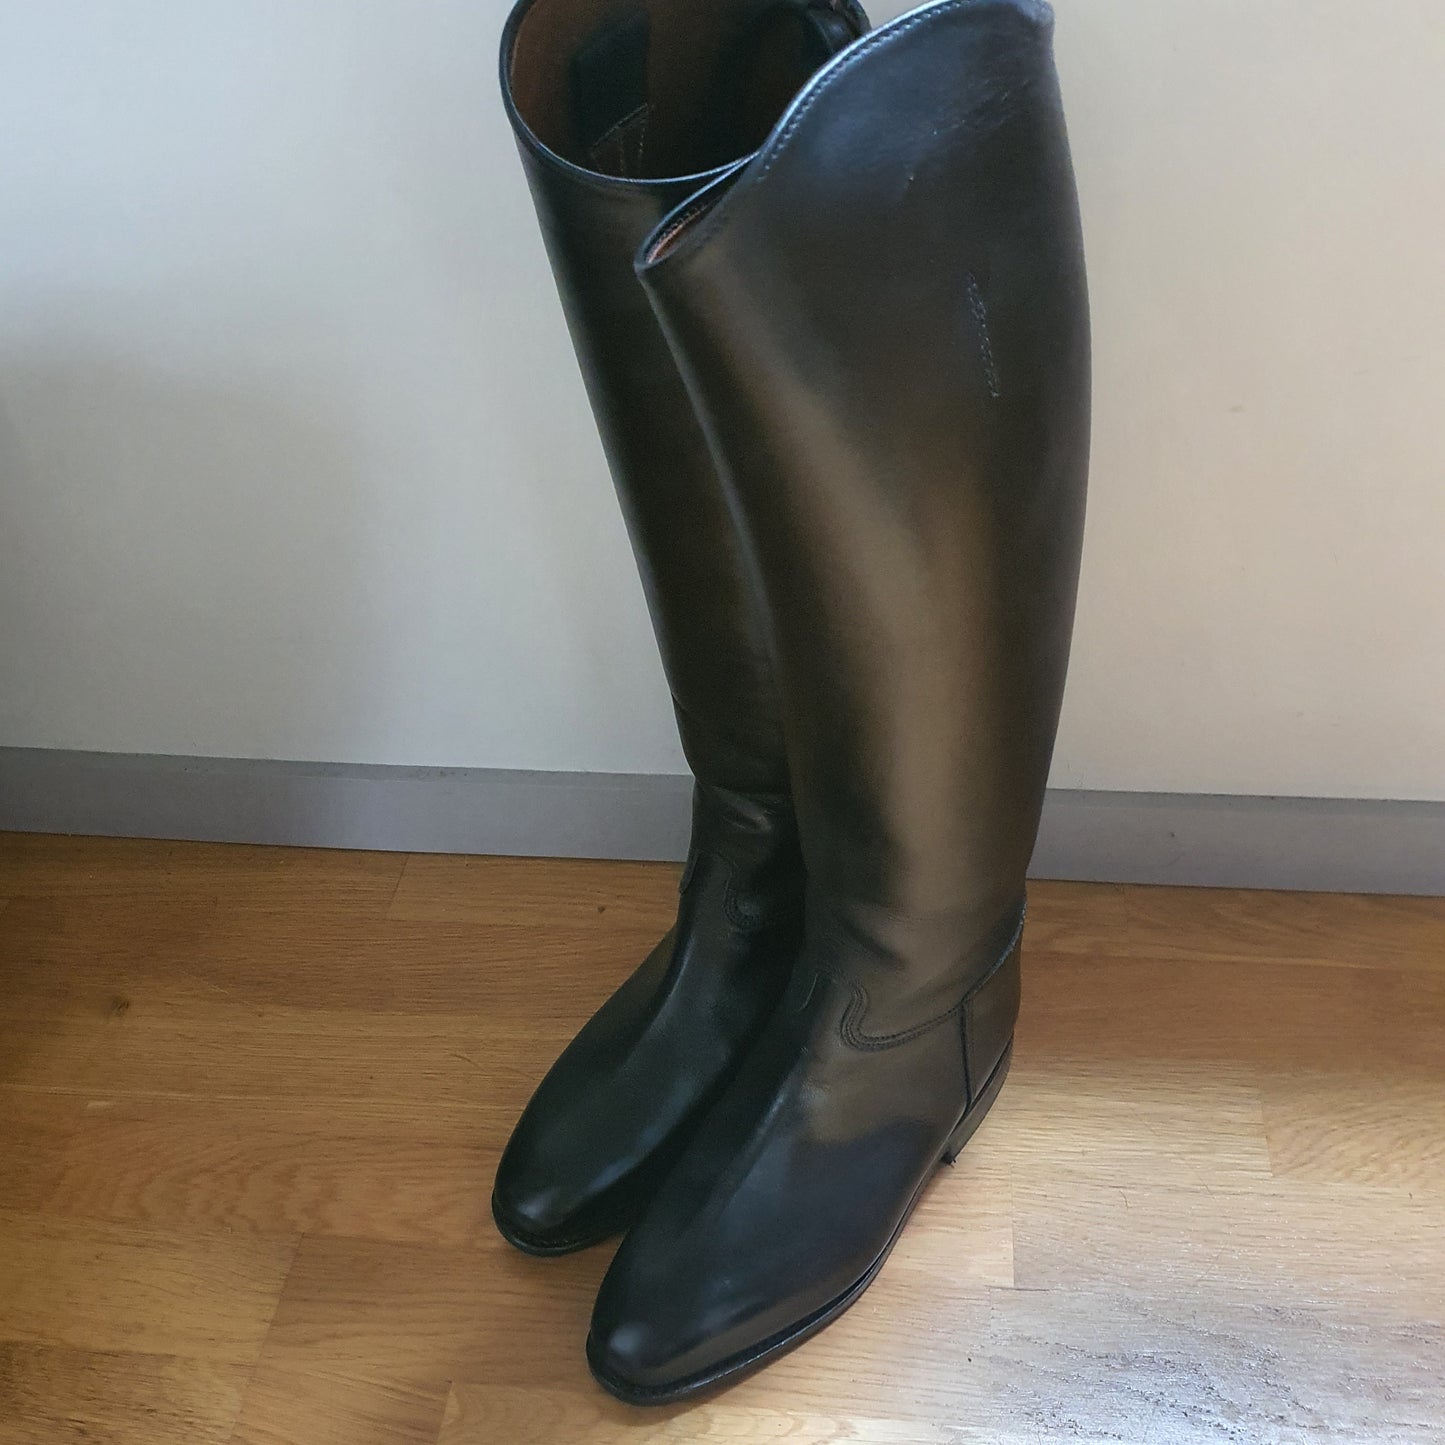 Konigs black long leather dressage / Showing riding boots size 38